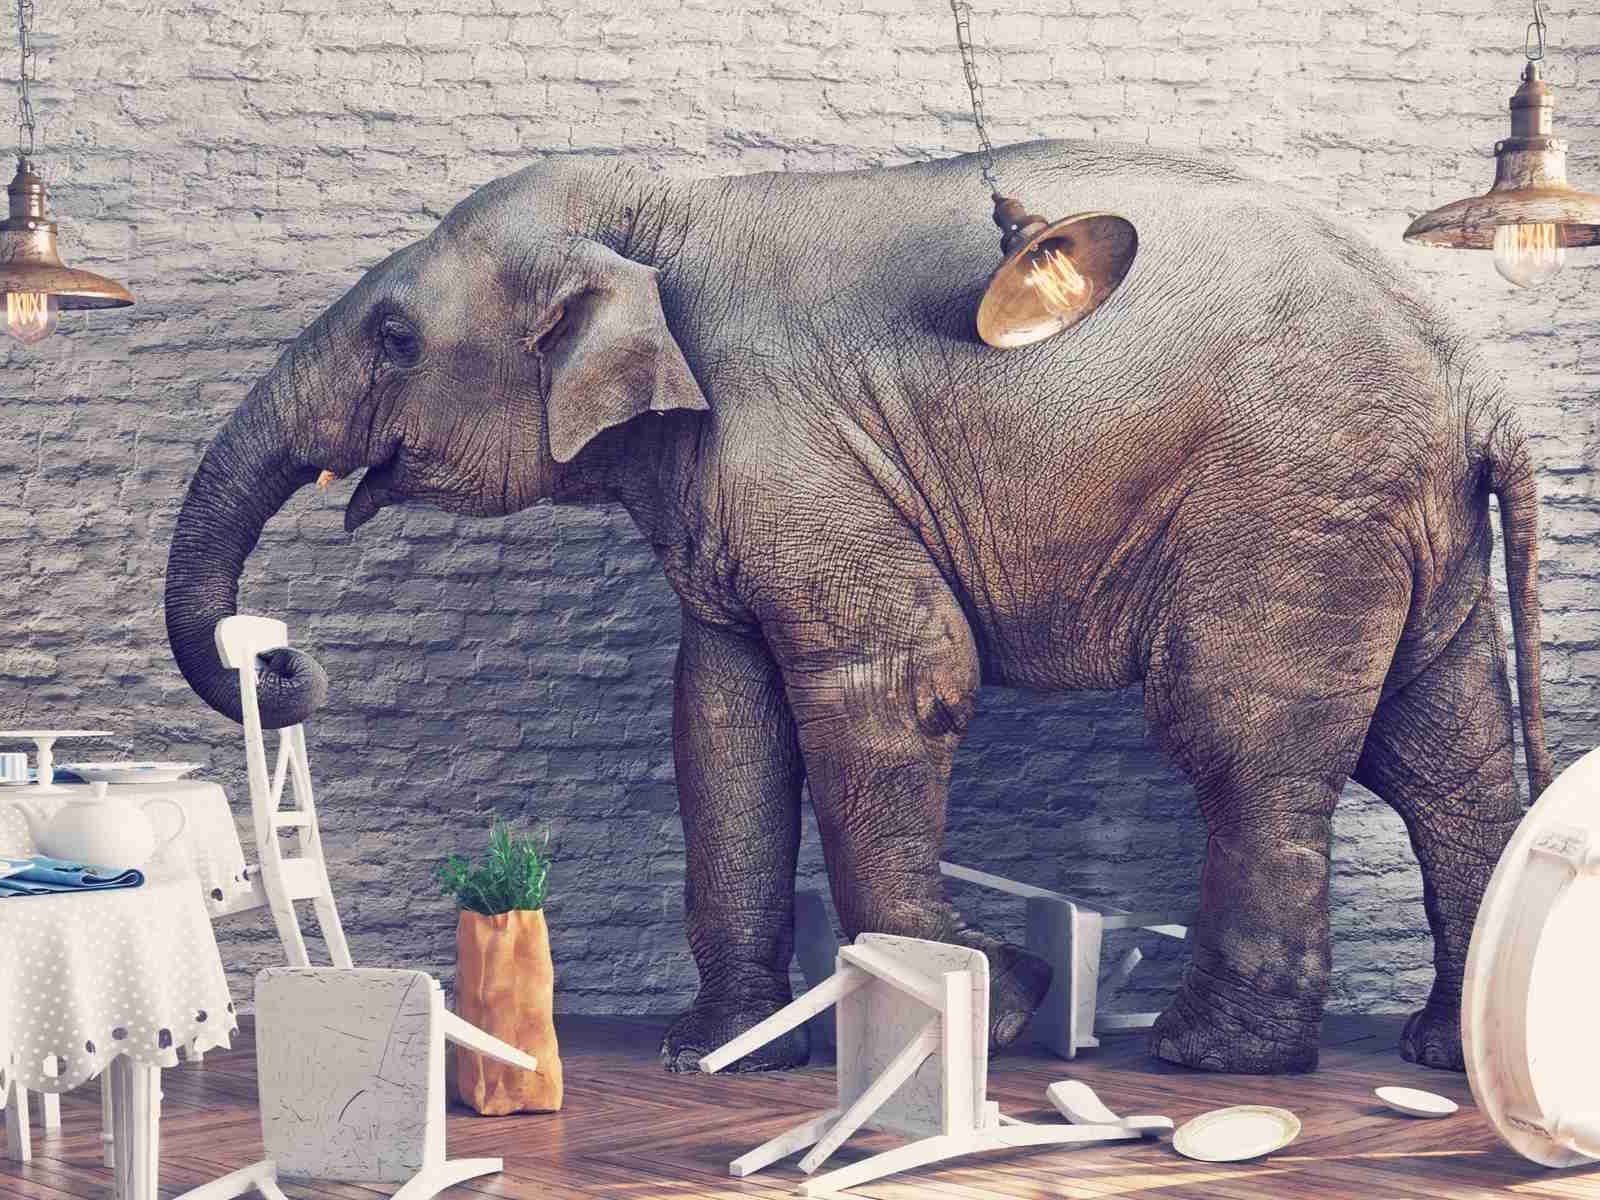 Too Much Wine: The Elephant in the Room